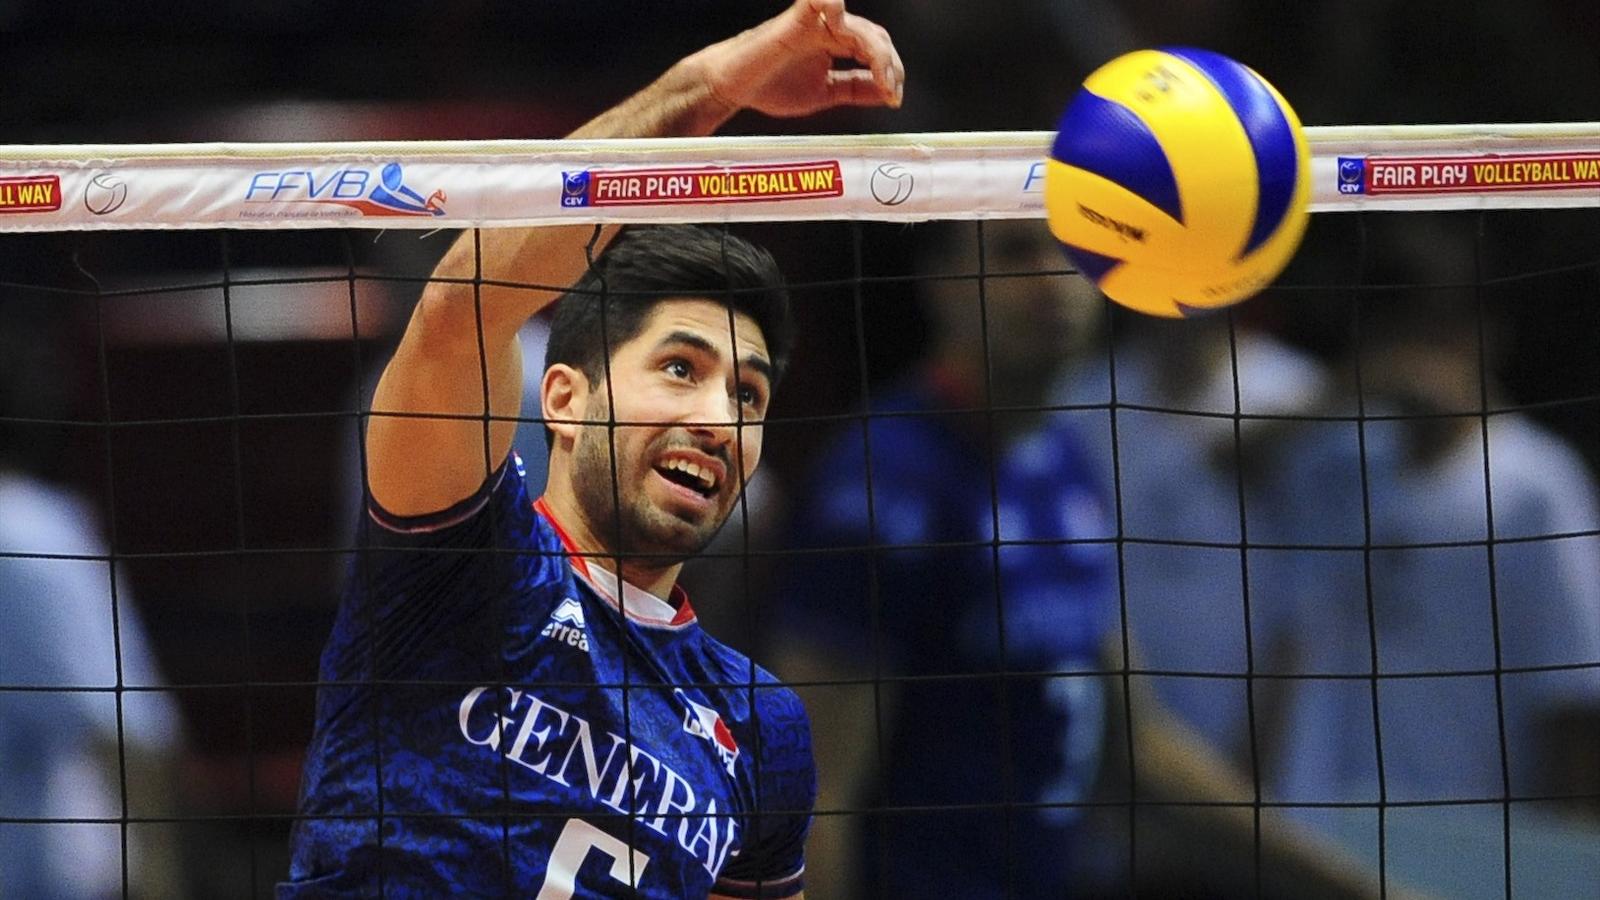 Match Volleyball France vs Allemagne en direct live streaming